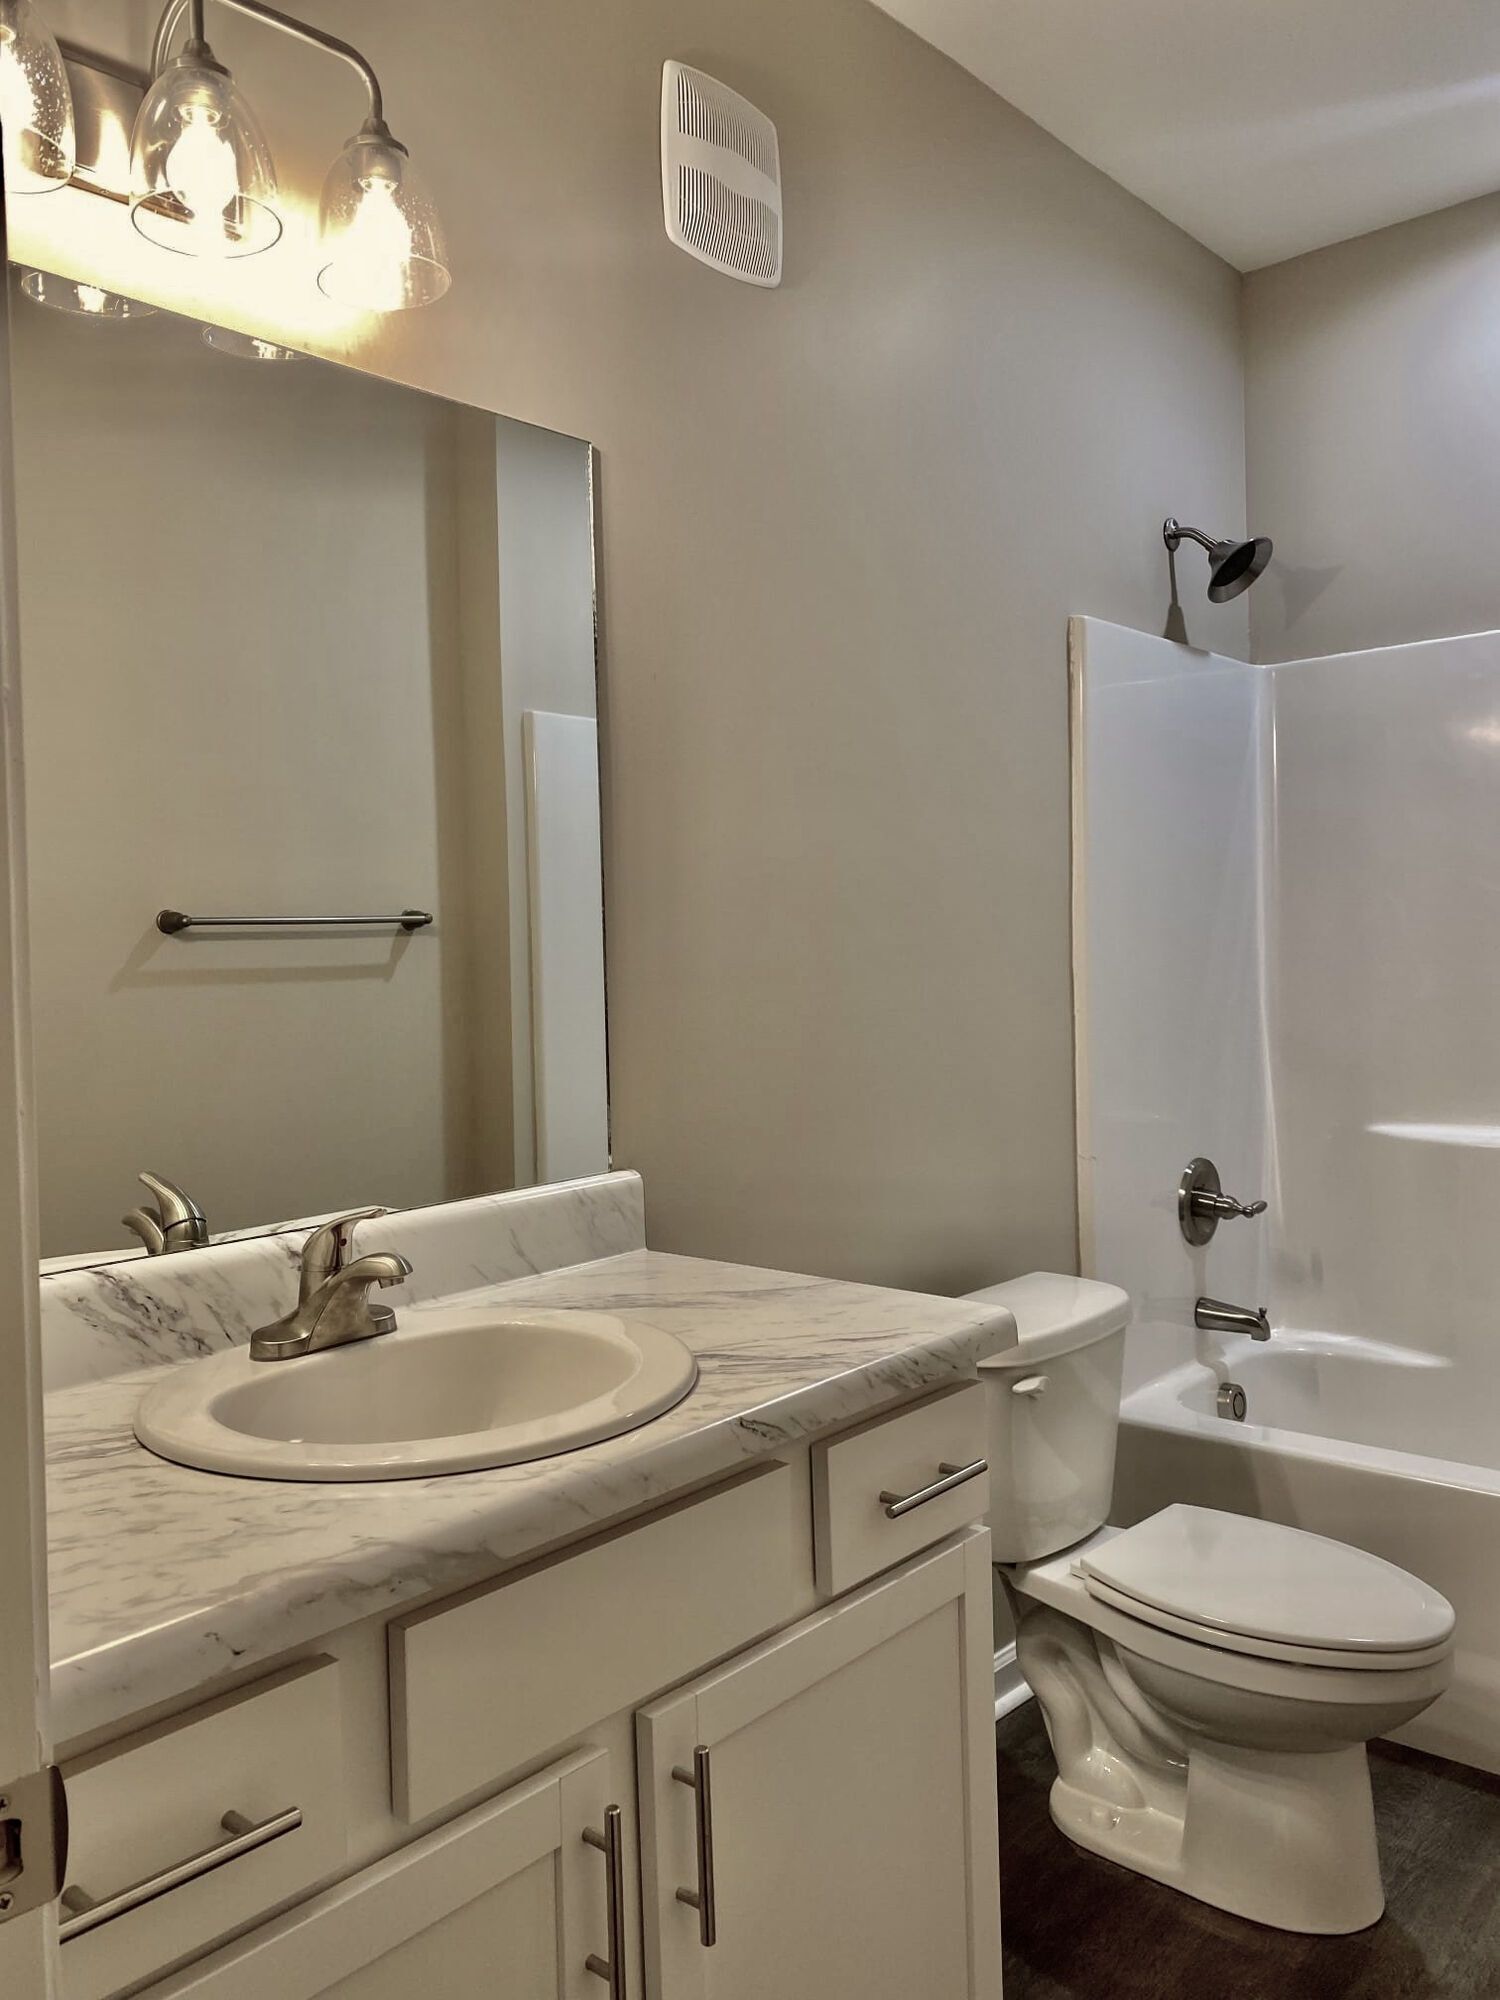 A bathroom with a sink , toilet , tub and mirror at Patriots Place.